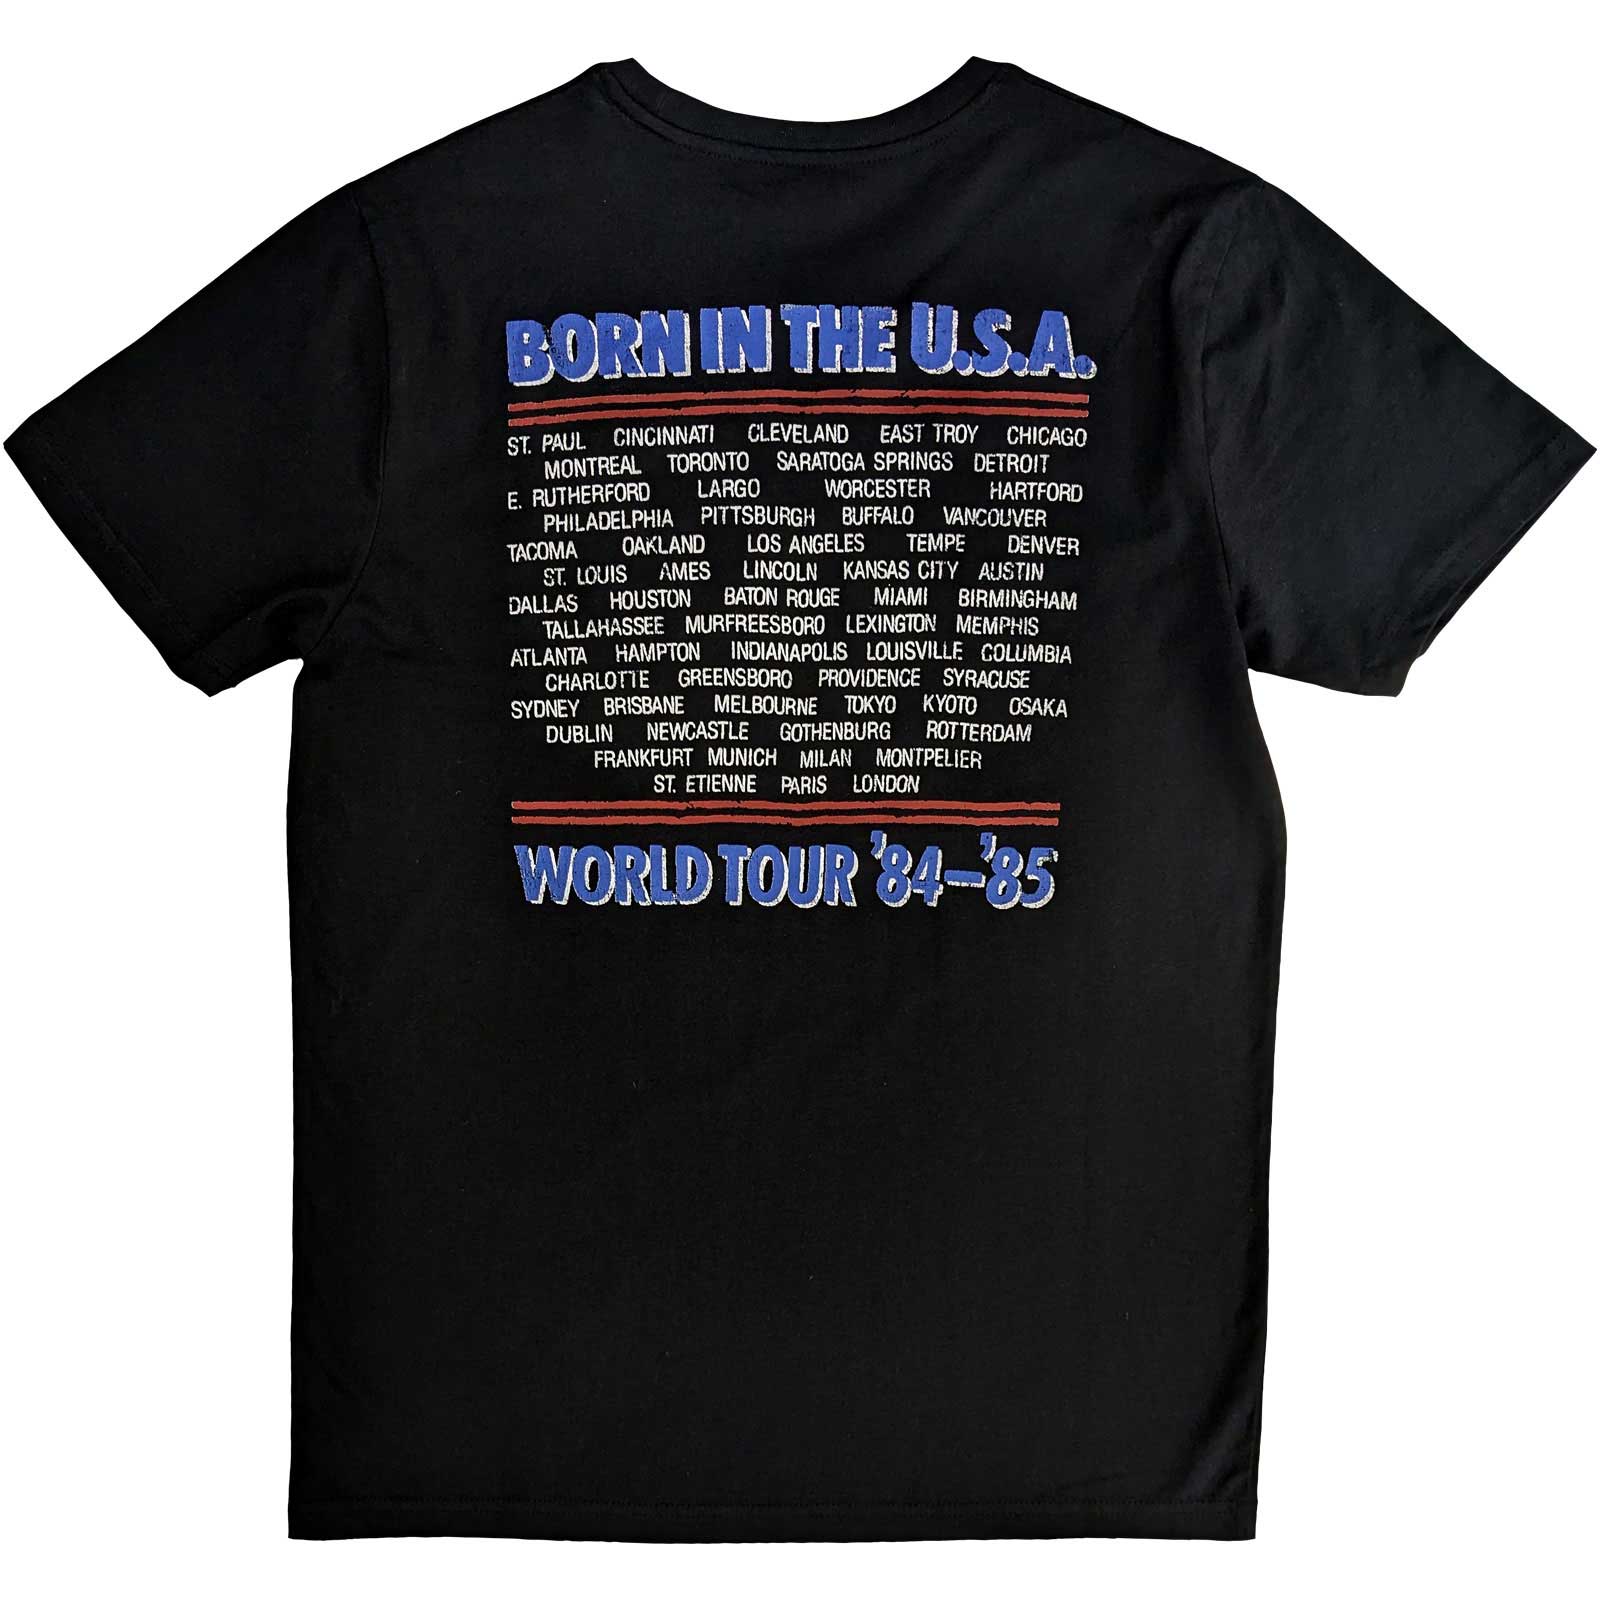 Bruce Springsteen T-Shirt - Born in the USA '85 World Tour (Back Print) - Unisex Official Licensed Design